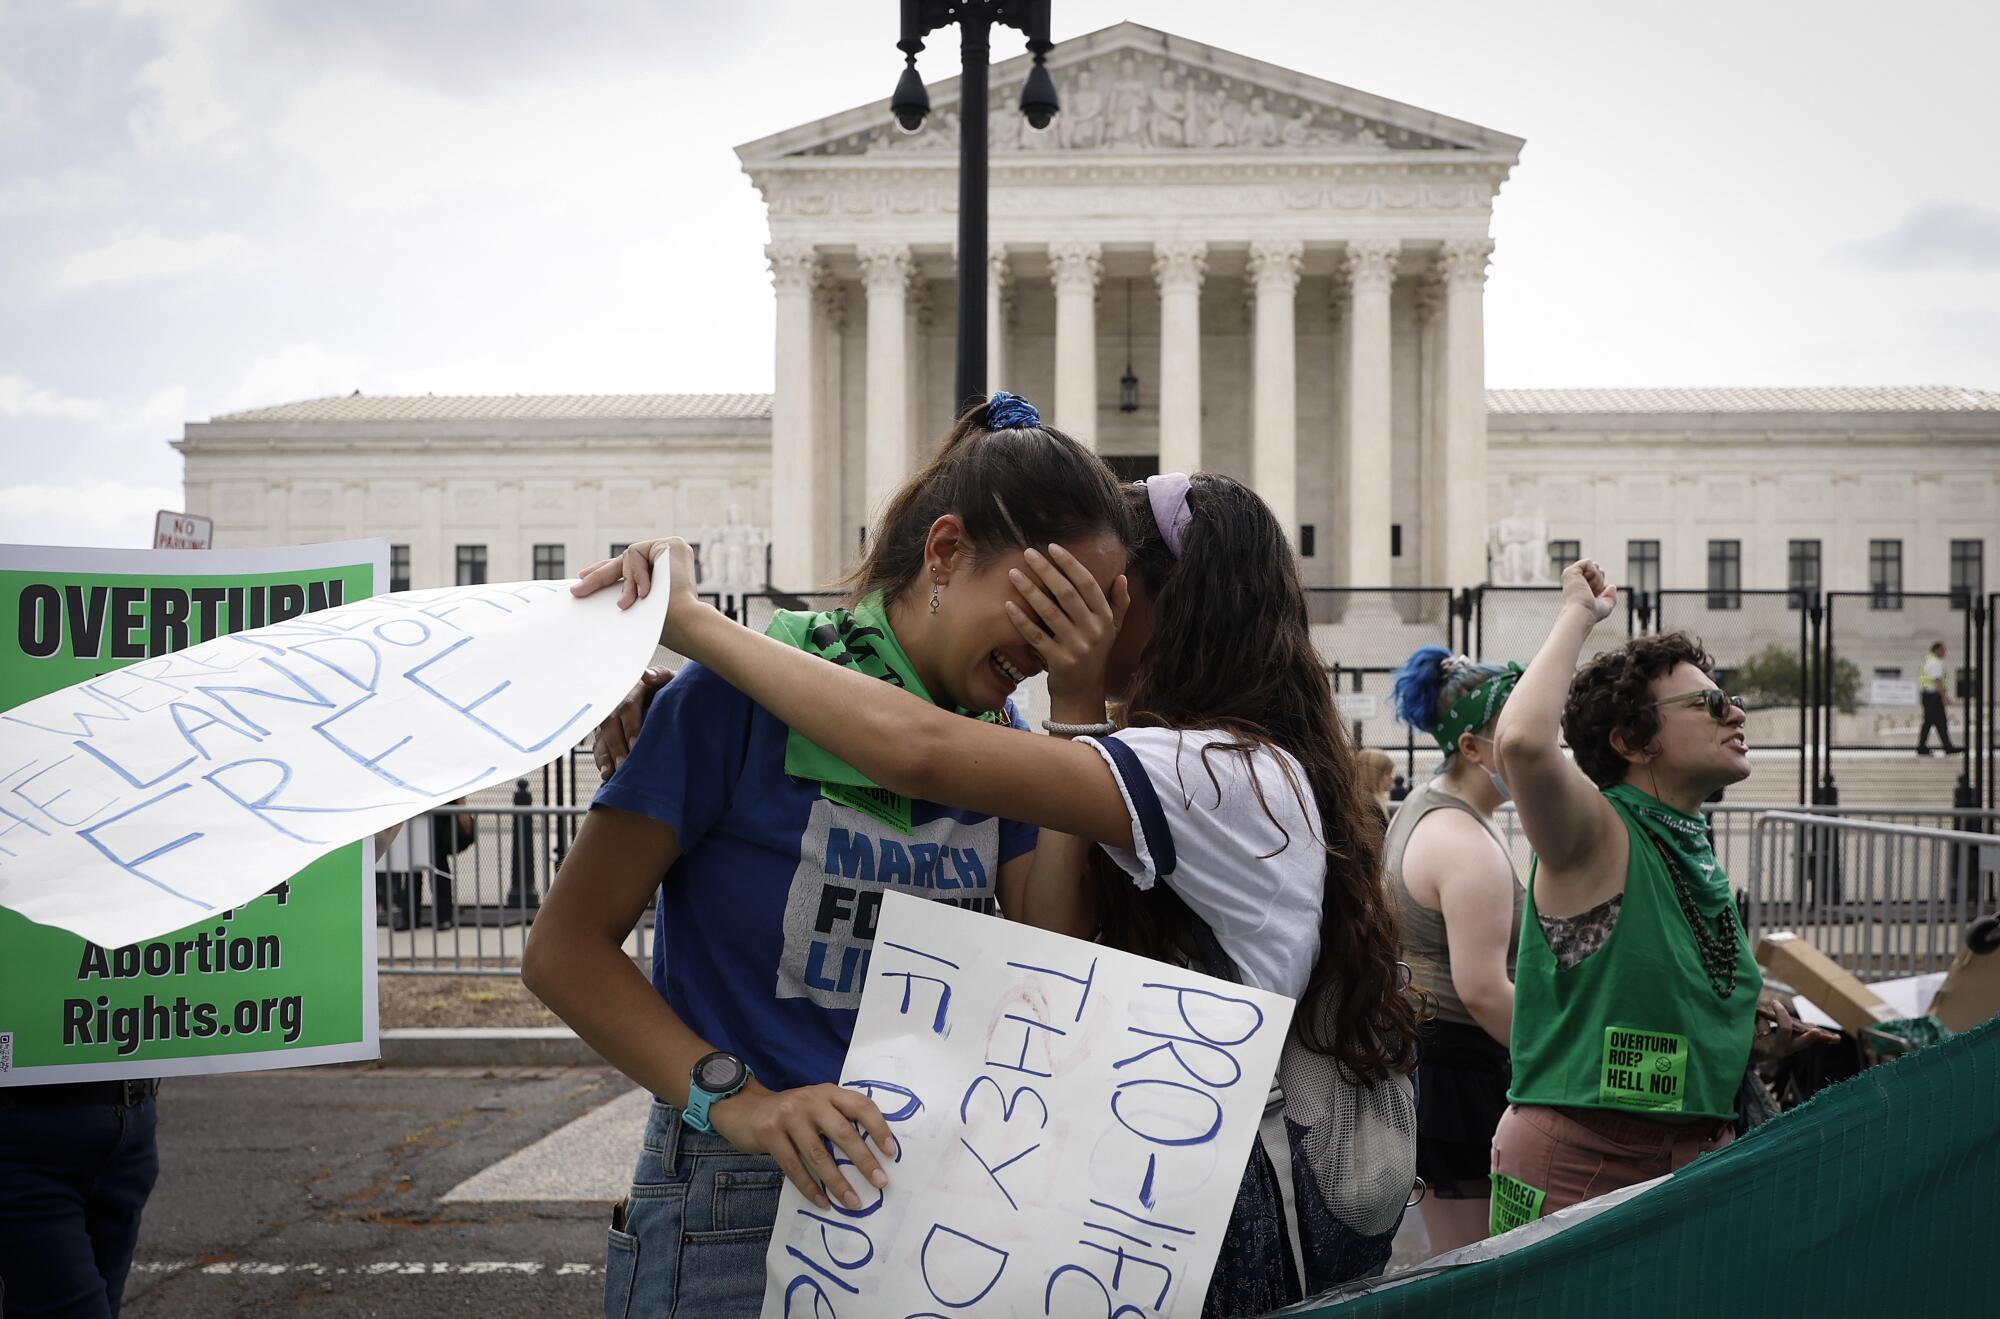 Abortion rights activists react in front of the U.S. Supreme Court.